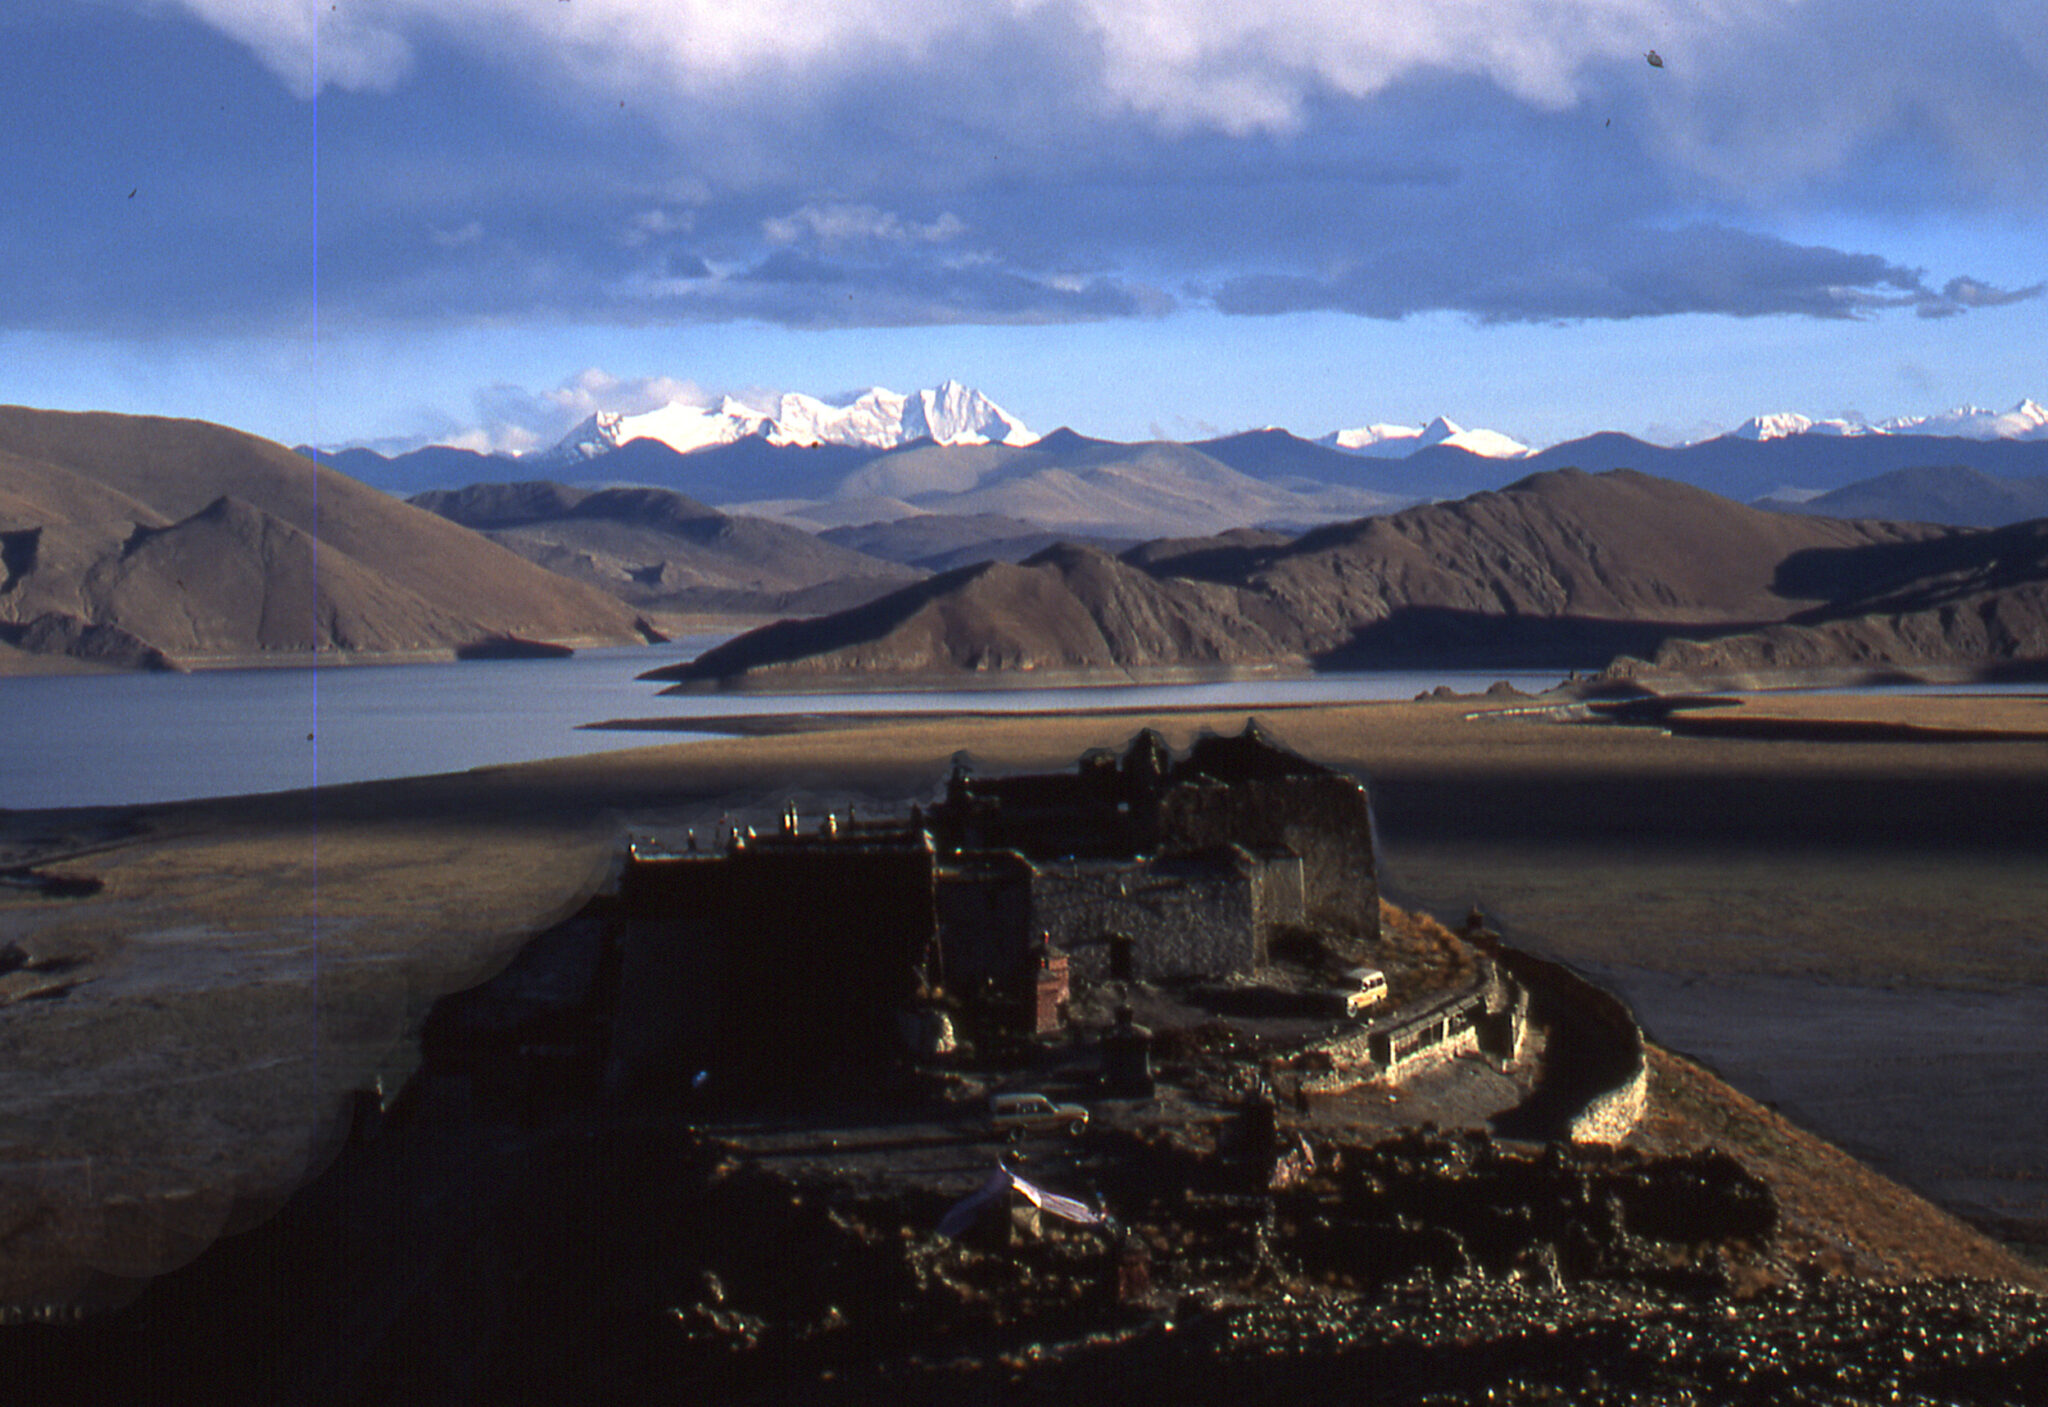 Hilltop monastery in foreground stands before sinuous lake and imposing, snowcapped mountain range in background